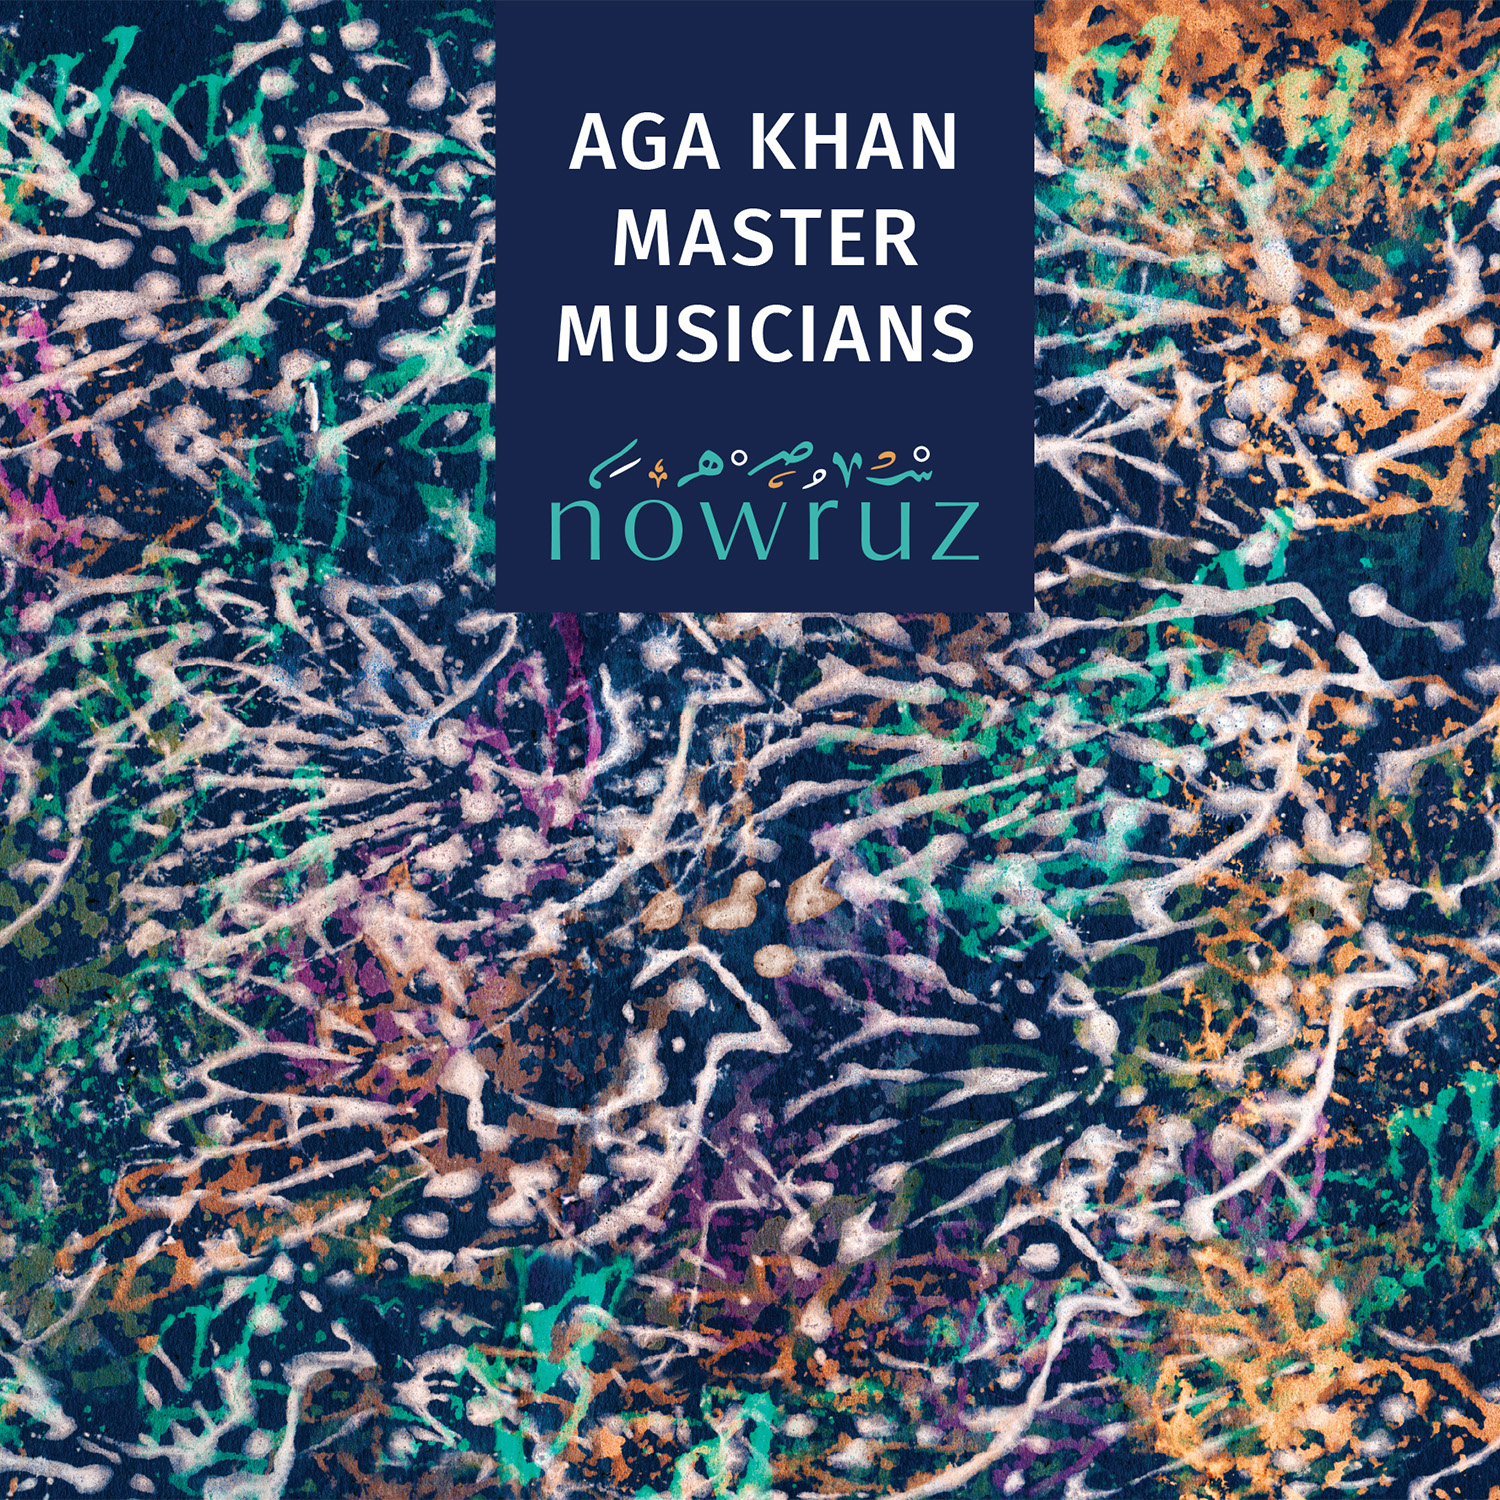 Cover of the Aga Khan Master Musicians' "Nowruz" (released by Smithsonian Folkways)